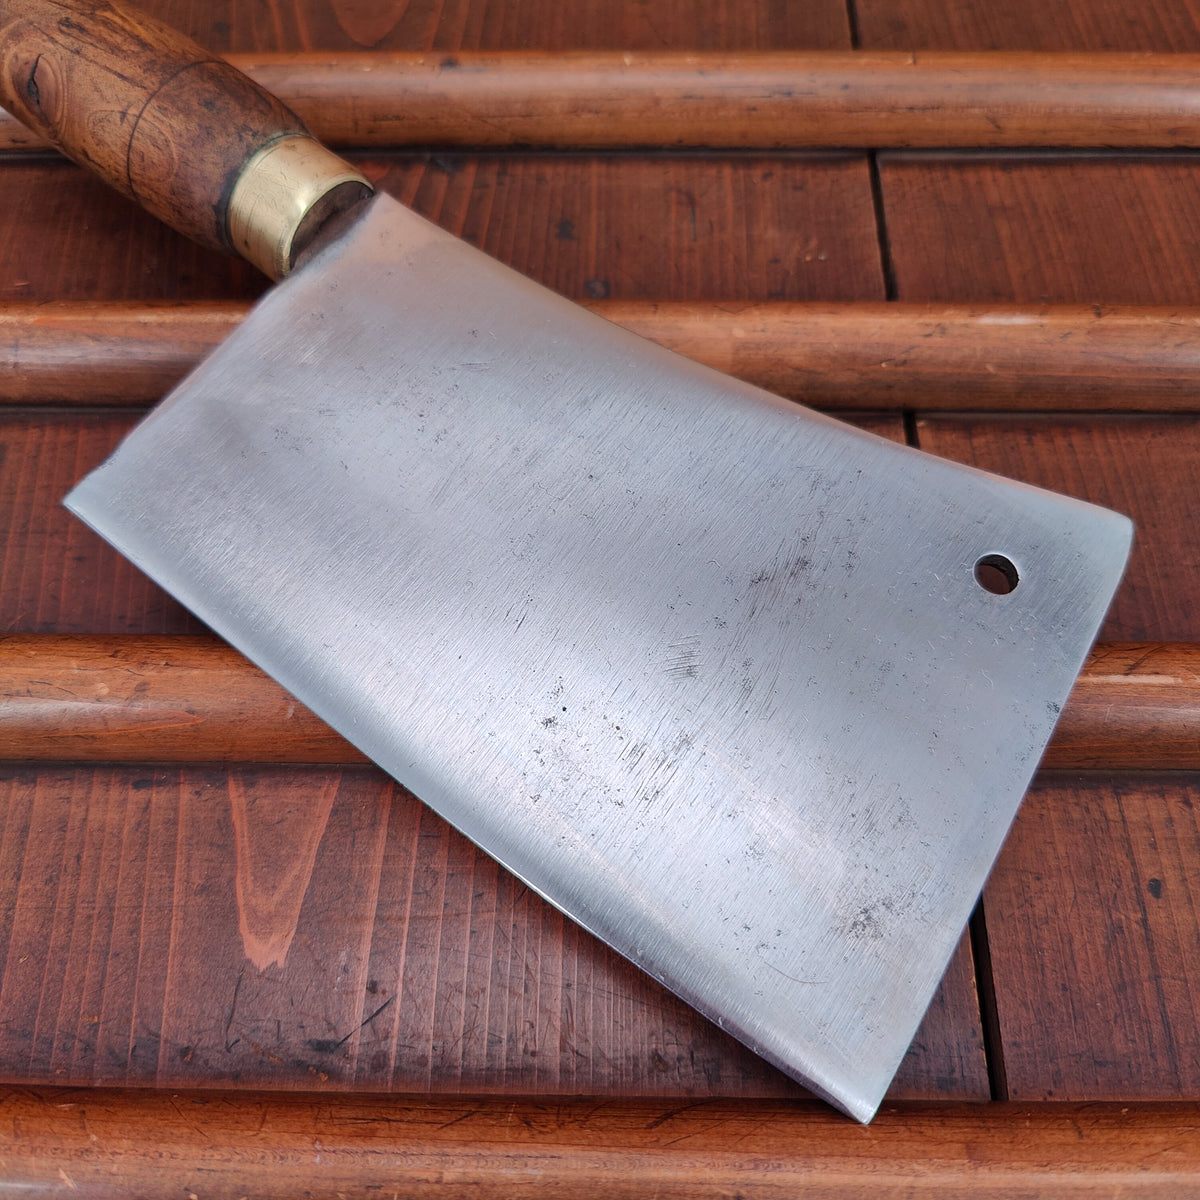 French Cleaver '303' 6" Carbon Steel Turned Handle C1900-1930's 17.5oz